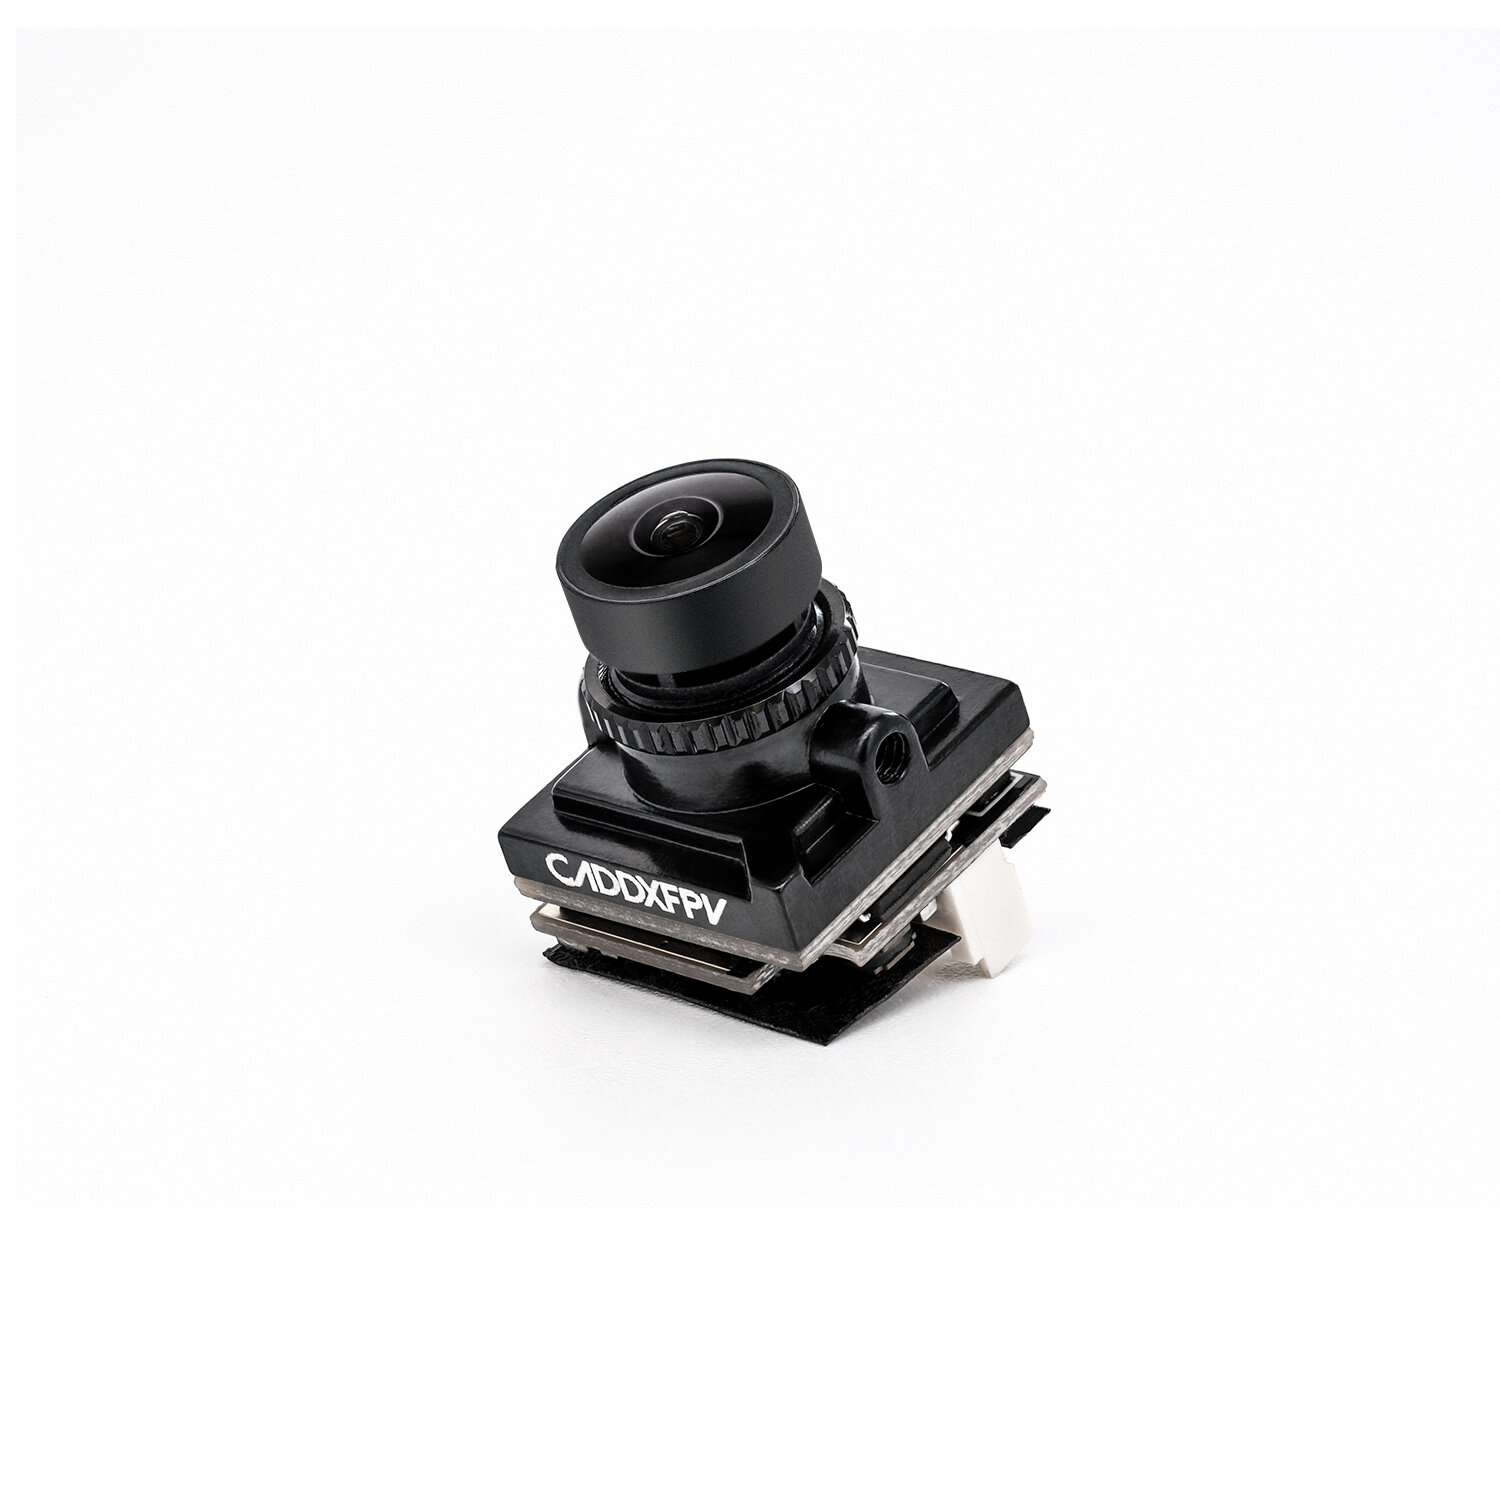 Caddx Baby Ratel 2 Nano Size 1200TVL 3g FOV165° Starlight Low Latency Day and Night Freestyle FPV Camera for FPV Racing